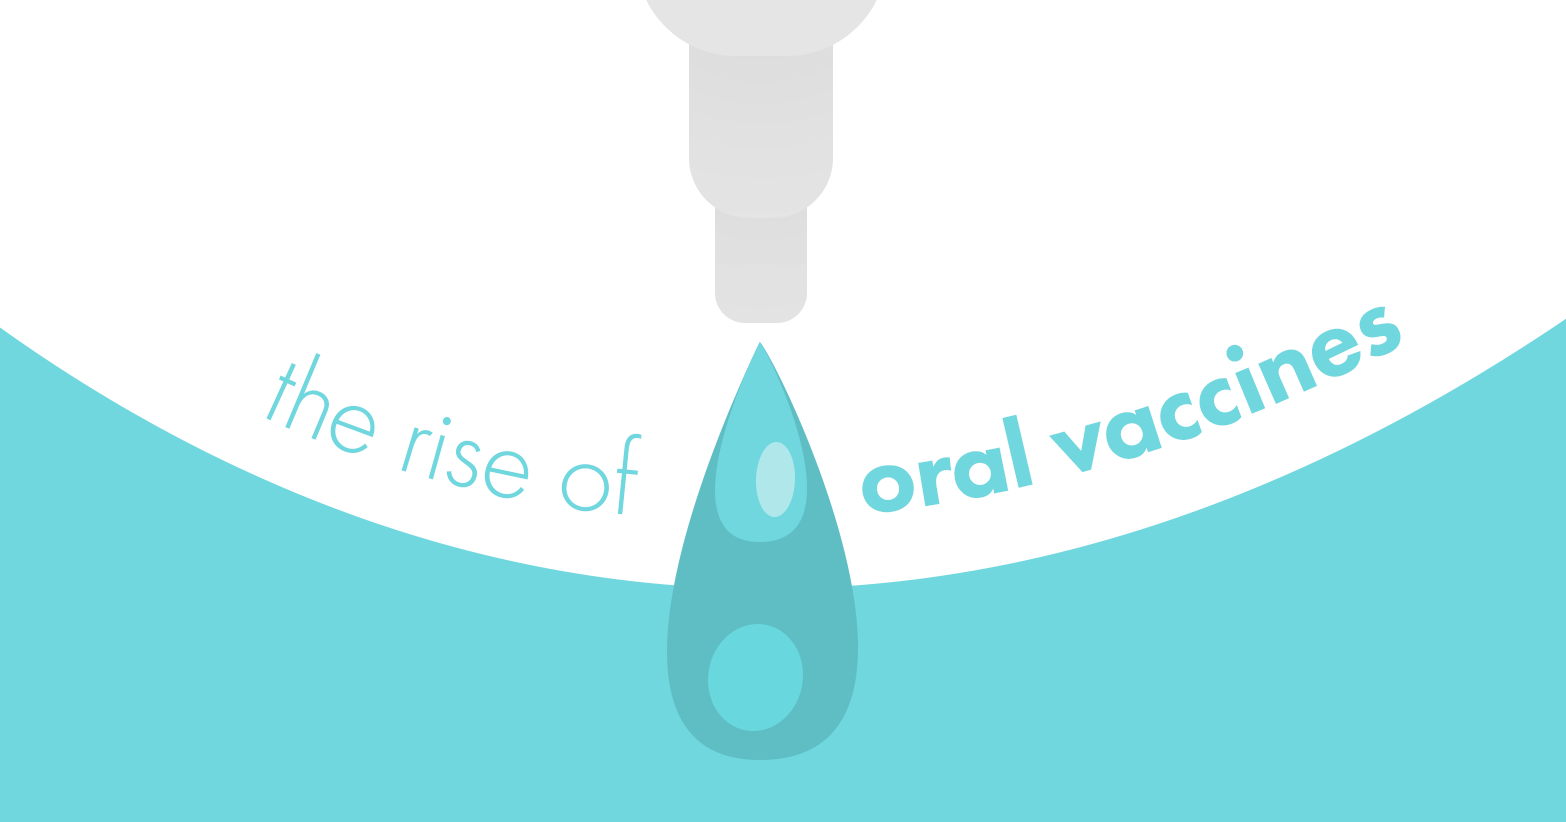 Illustration representing a drop of liquid of an oral vaccine